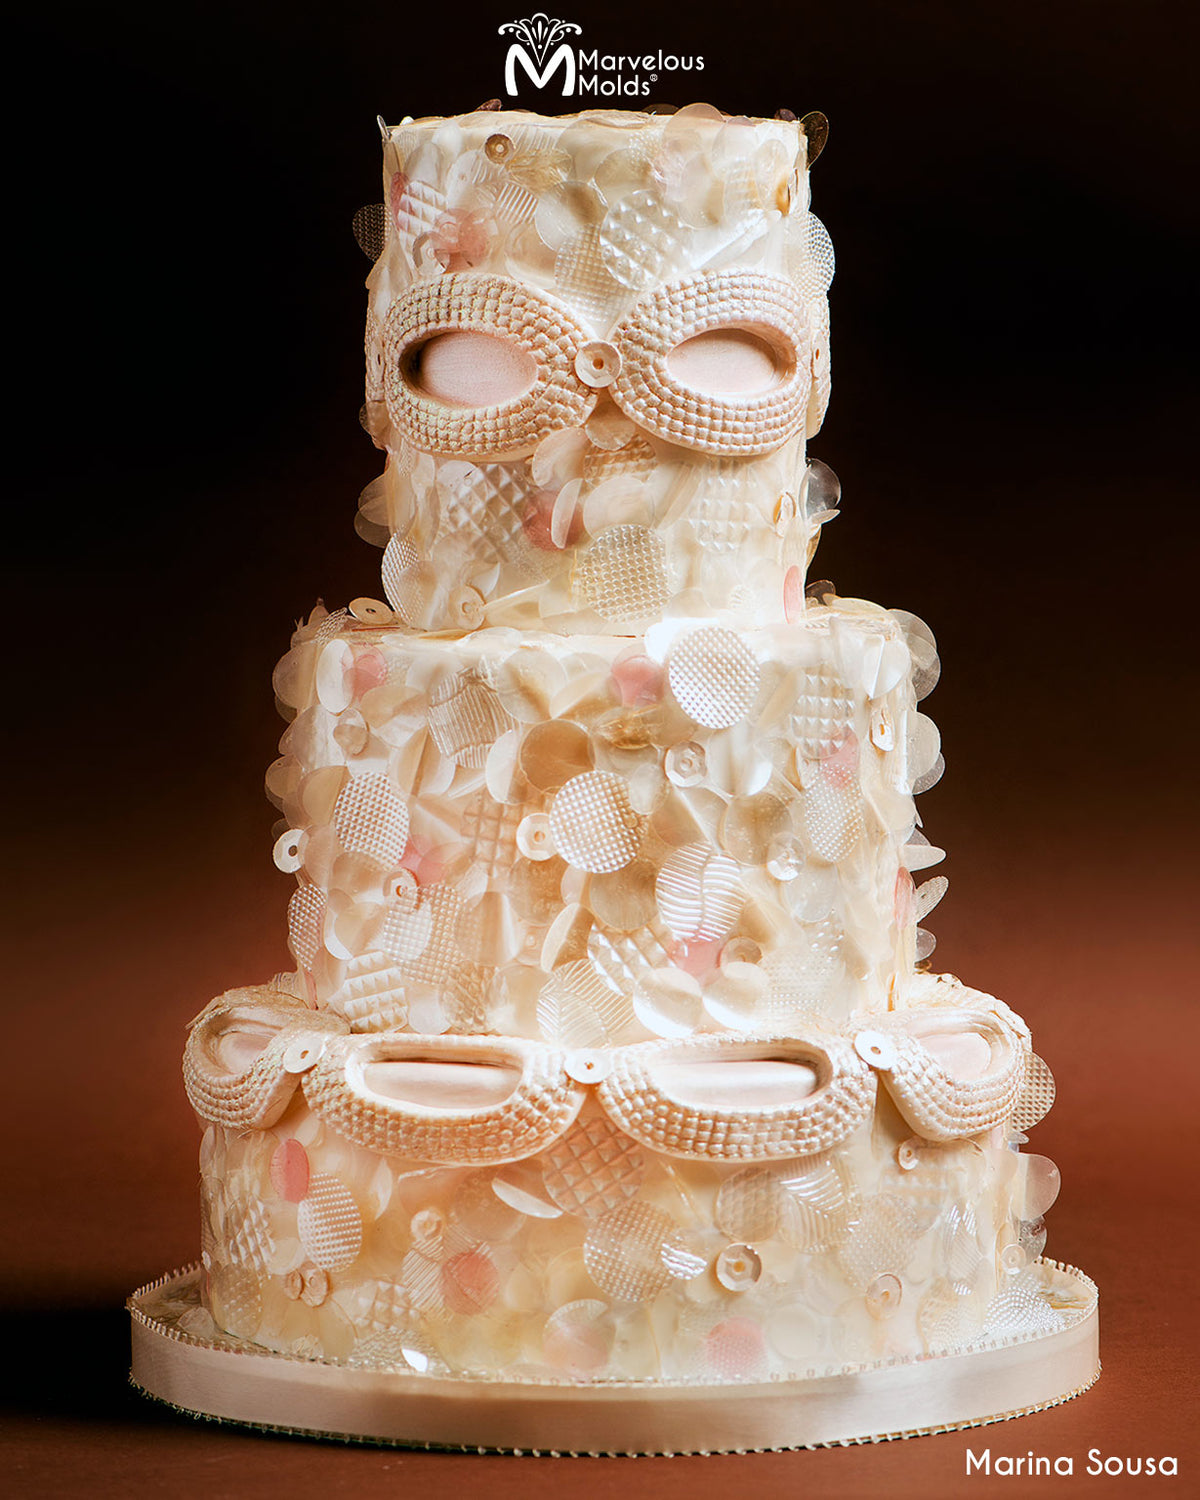 Frilly Decorated Wedding Cake Created Decorated with the Marvelous Molds Opulence Brooch Silicone Mold